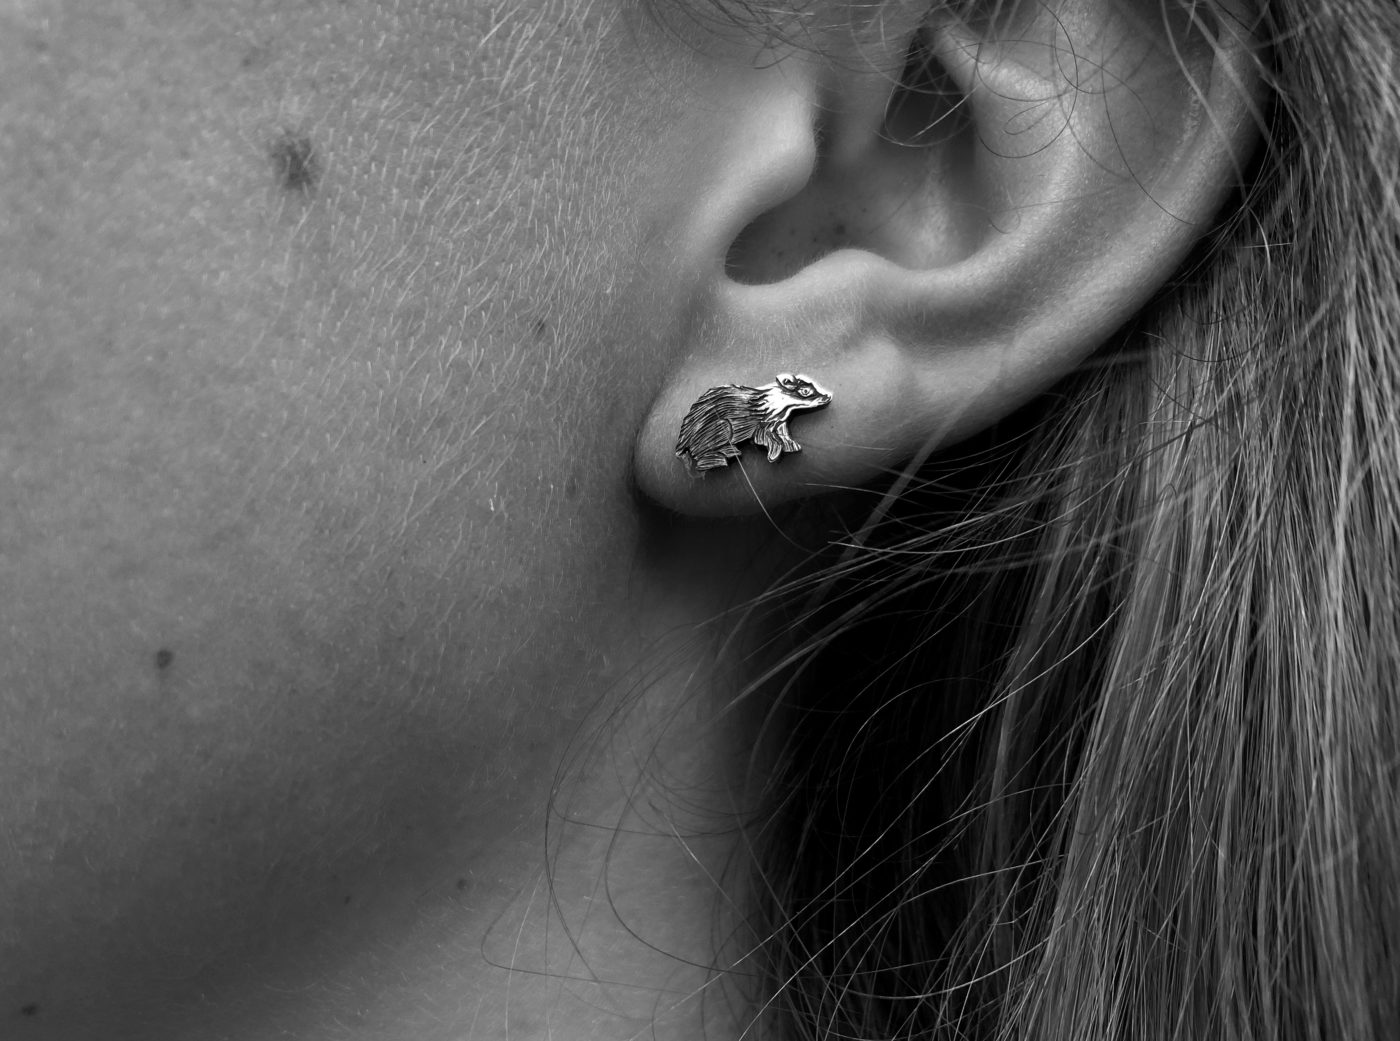 Badger and moon earrings made from recycled silver shillings